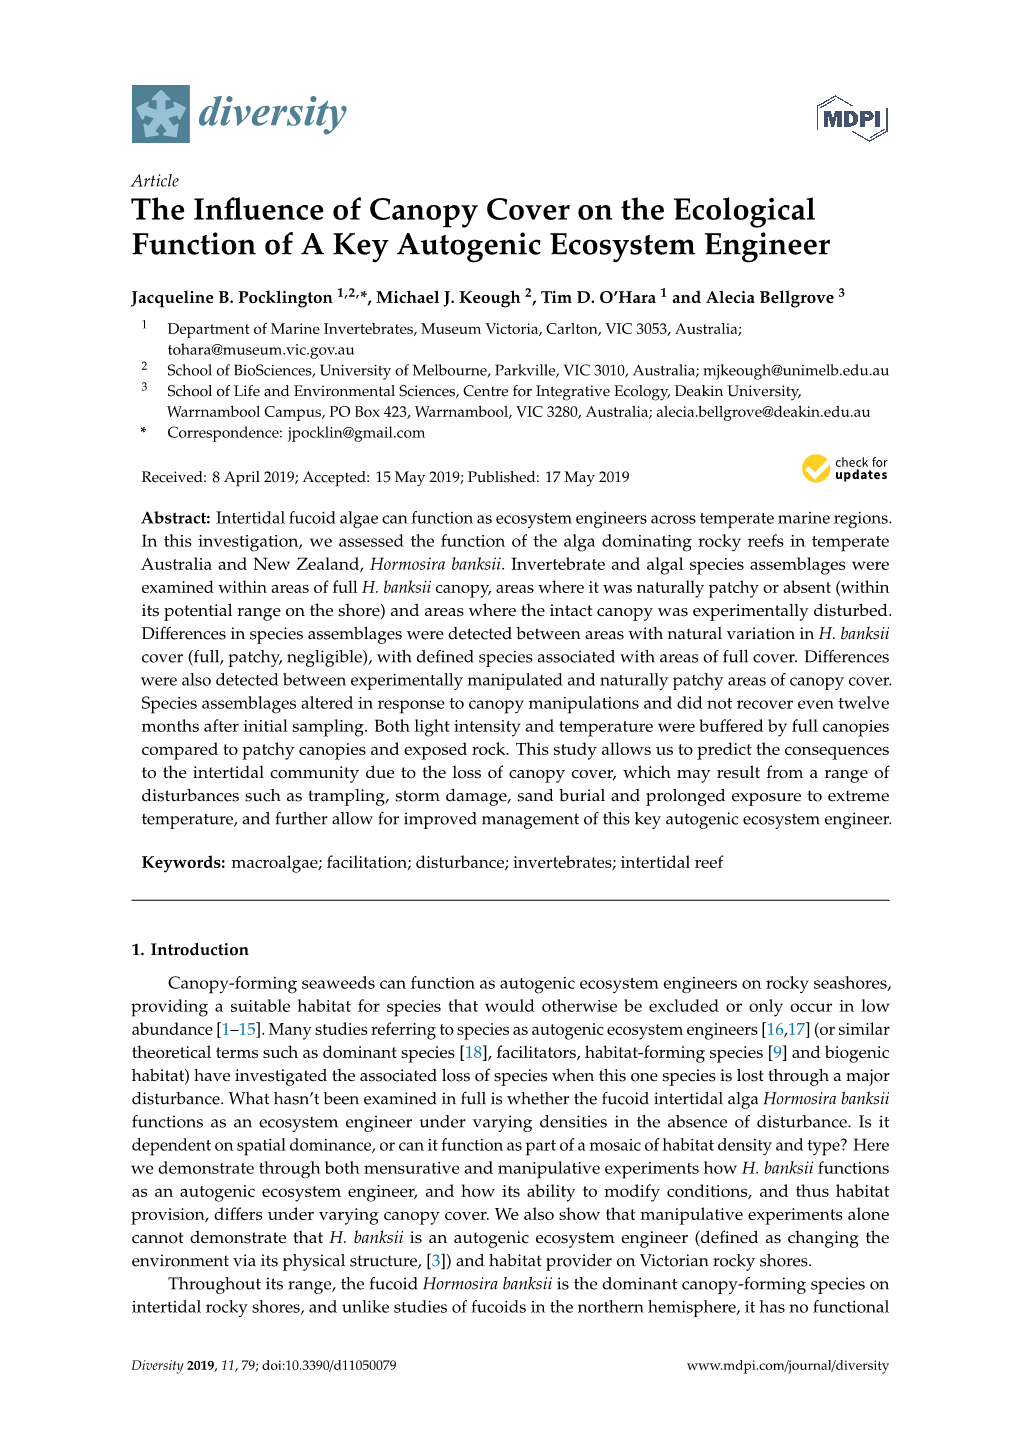 The Influence of Canopy Cover on the Ecological Function of a Key Autogenic Ecosystem Engineer